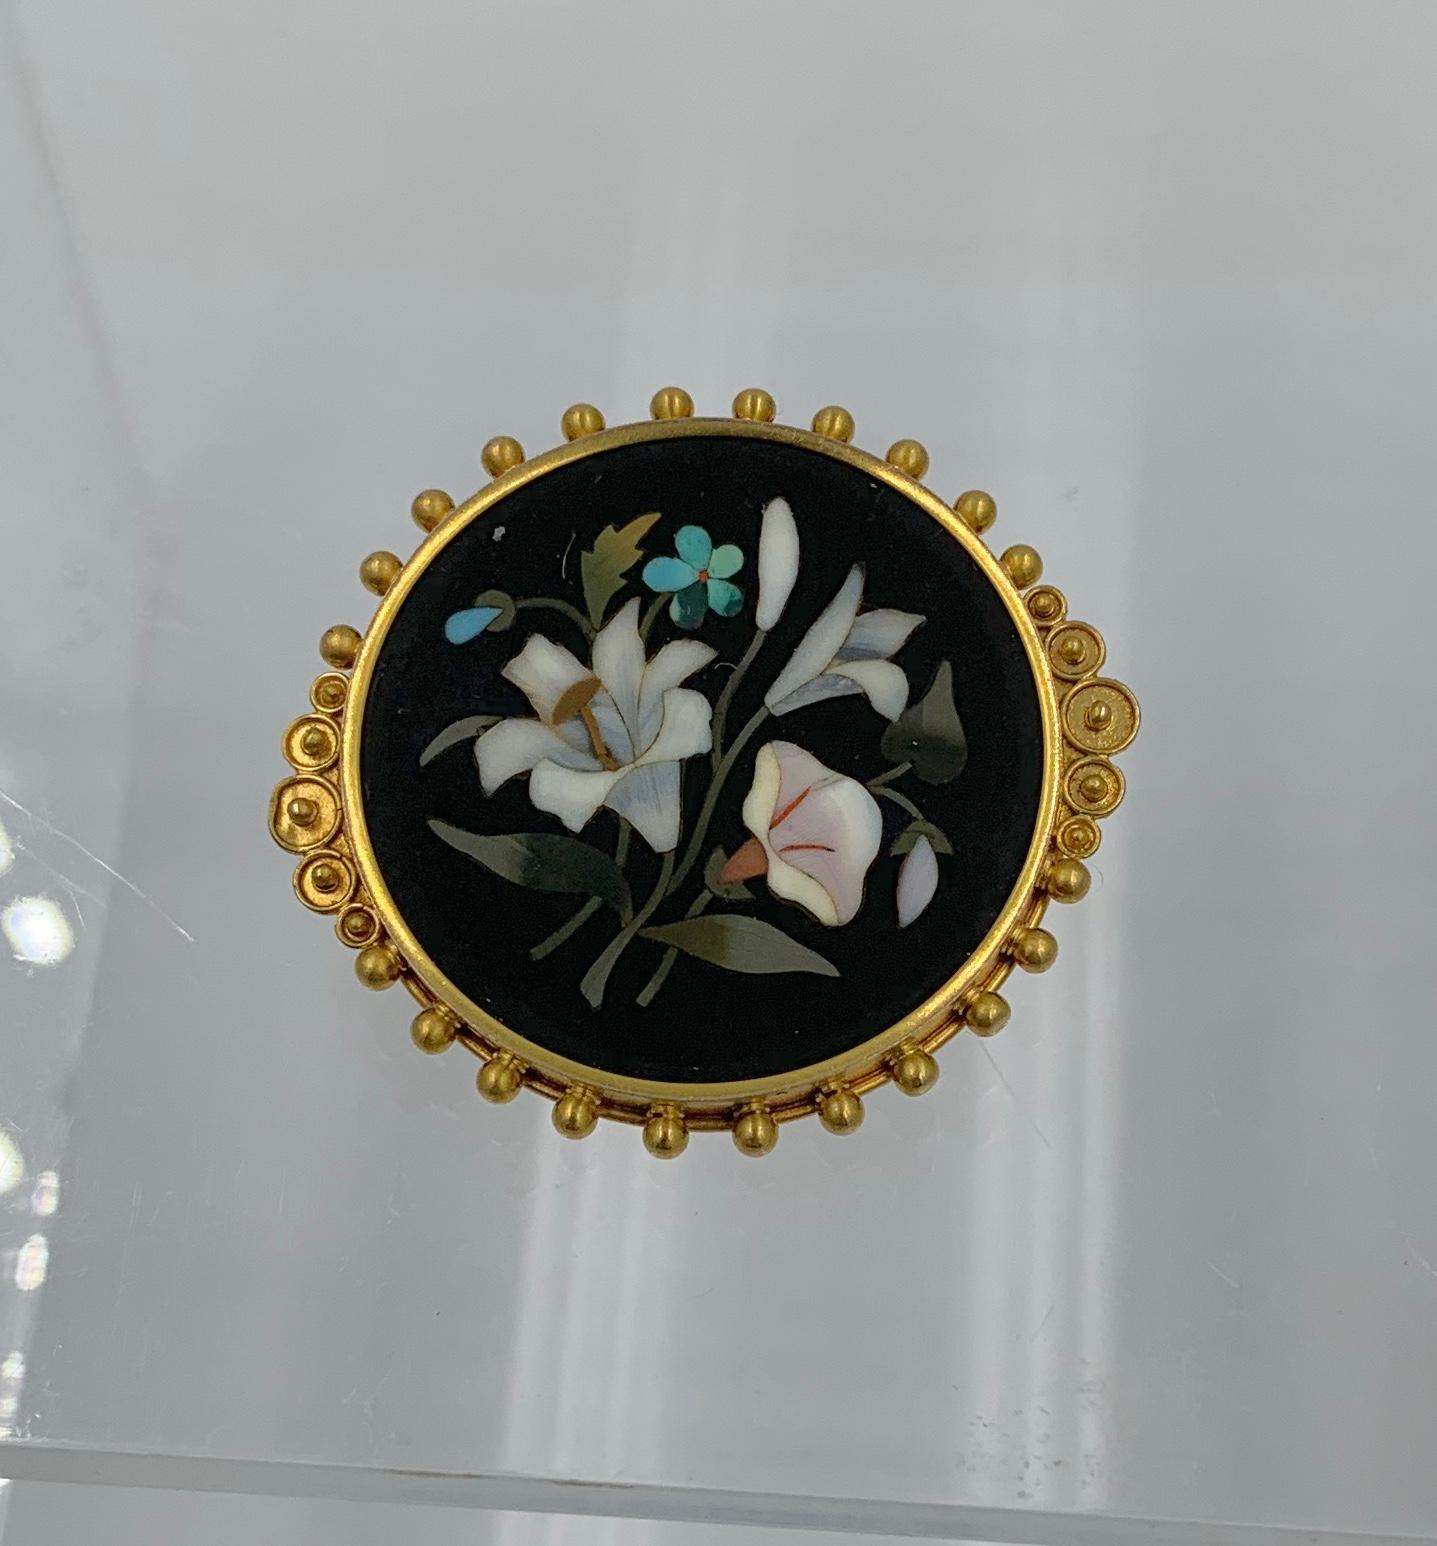 Mixed Cut Pietra Dura Flower Lily Poppy Brooch Pin Gold Antique Victorian Etruscan Revival